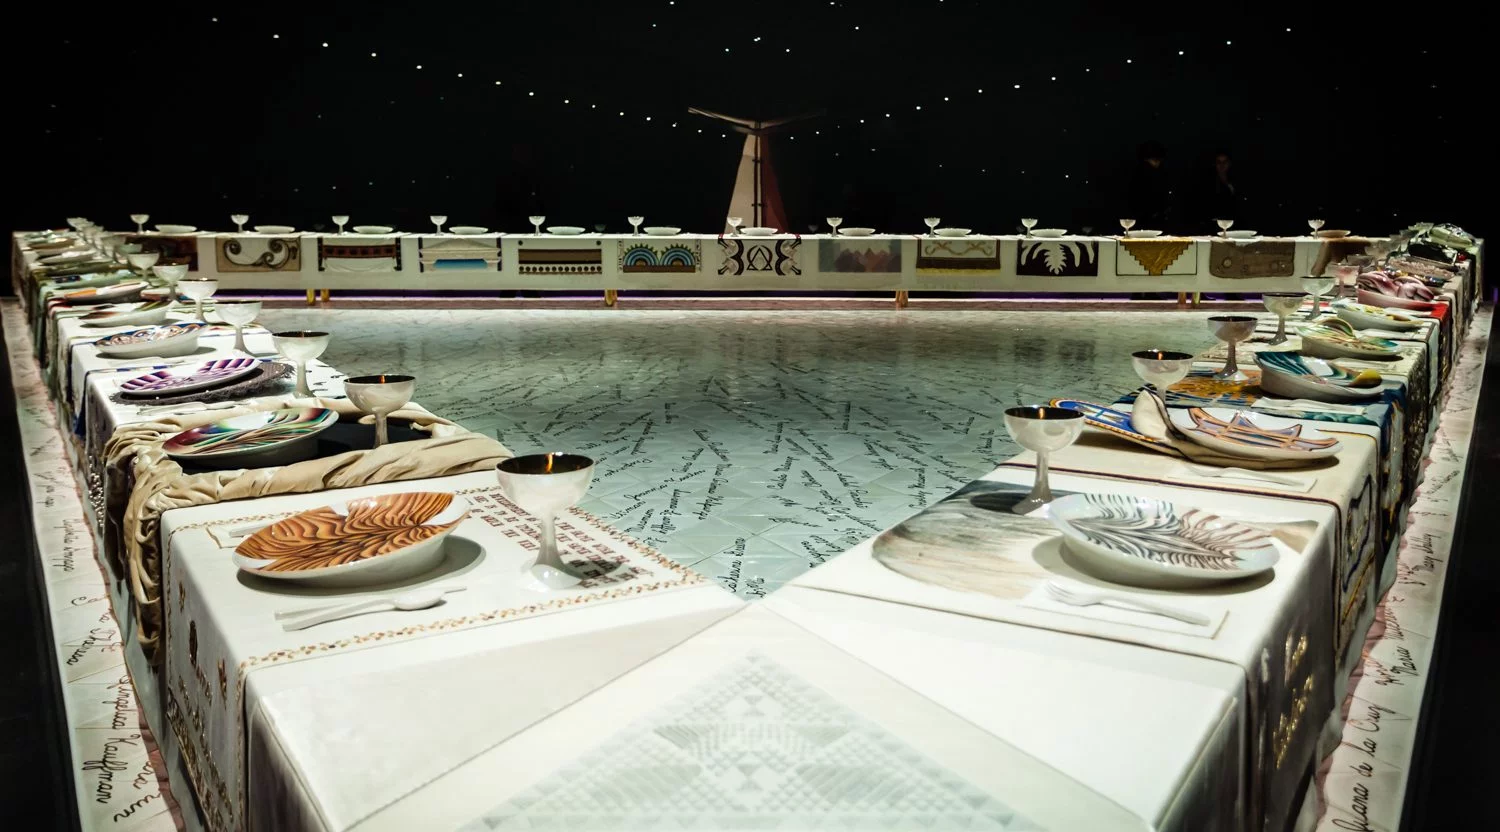 Judy Chicago, The Dinner Party, 1974-1979, Elizabeth A. Sackler Center for Feminist Art del Brooklyn Museum, New York, NY, USA. Kevin Case/Flickr (CC BY-NC-SA 2.0). Dettaglio.